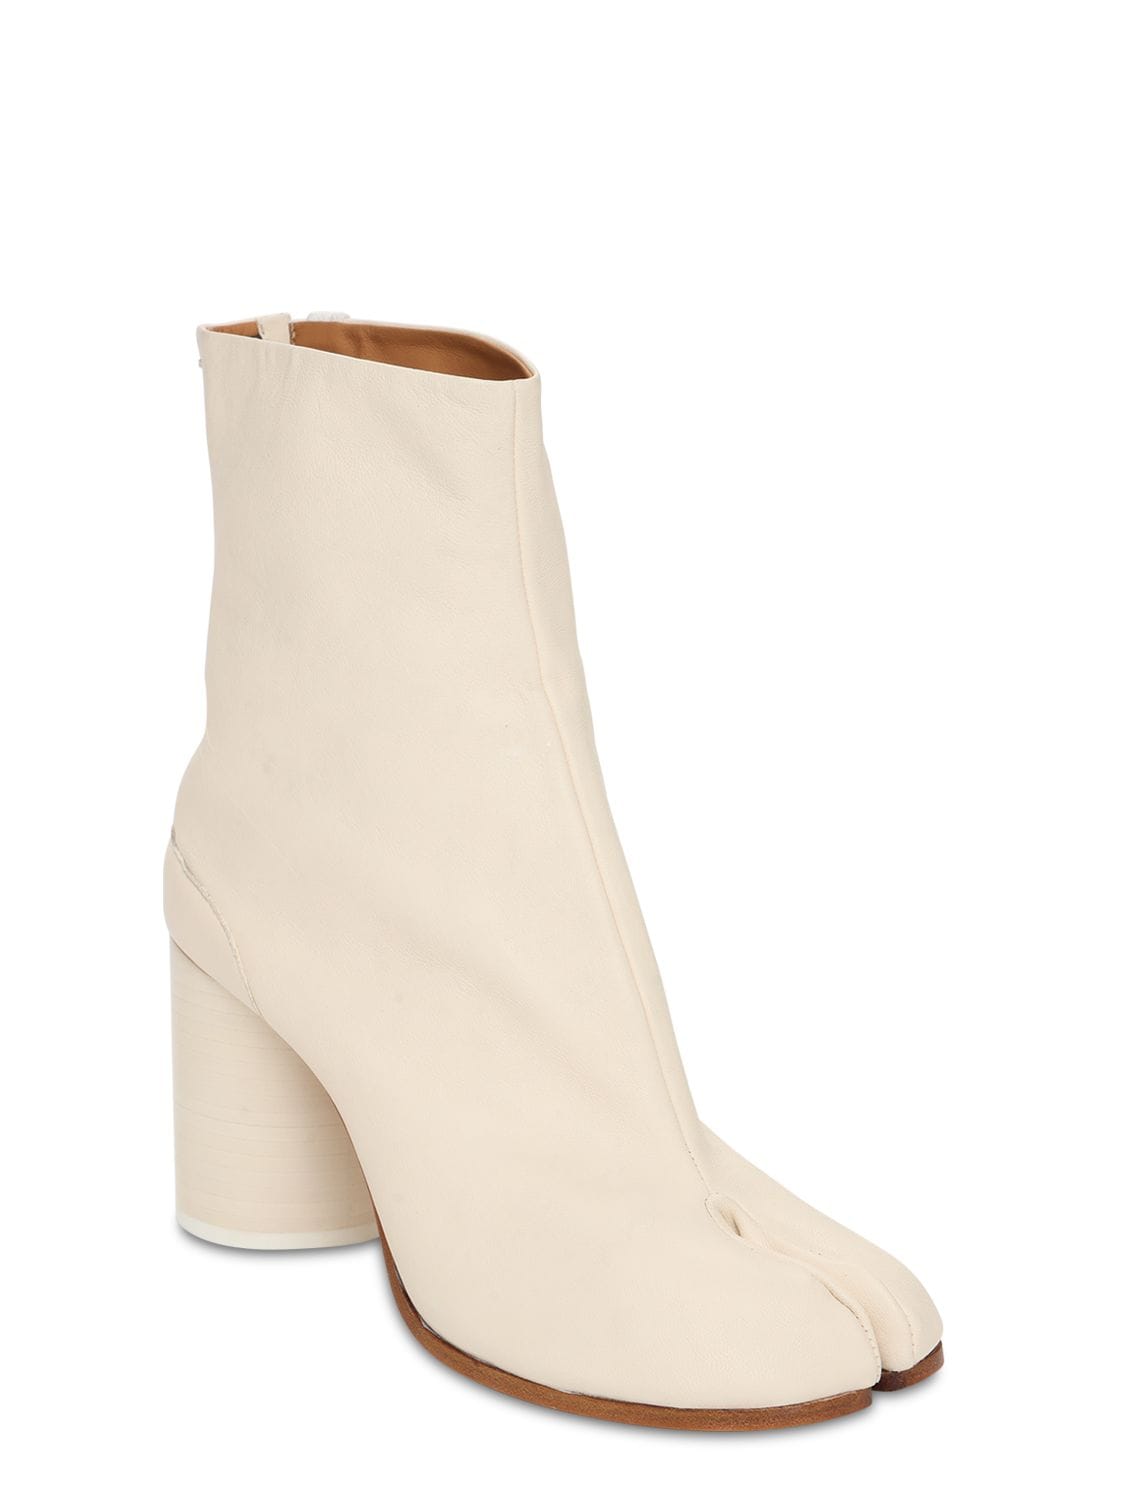 Shop Maison Margiela 80mm Tabi Vintage Leather Ankle Boots In Cream